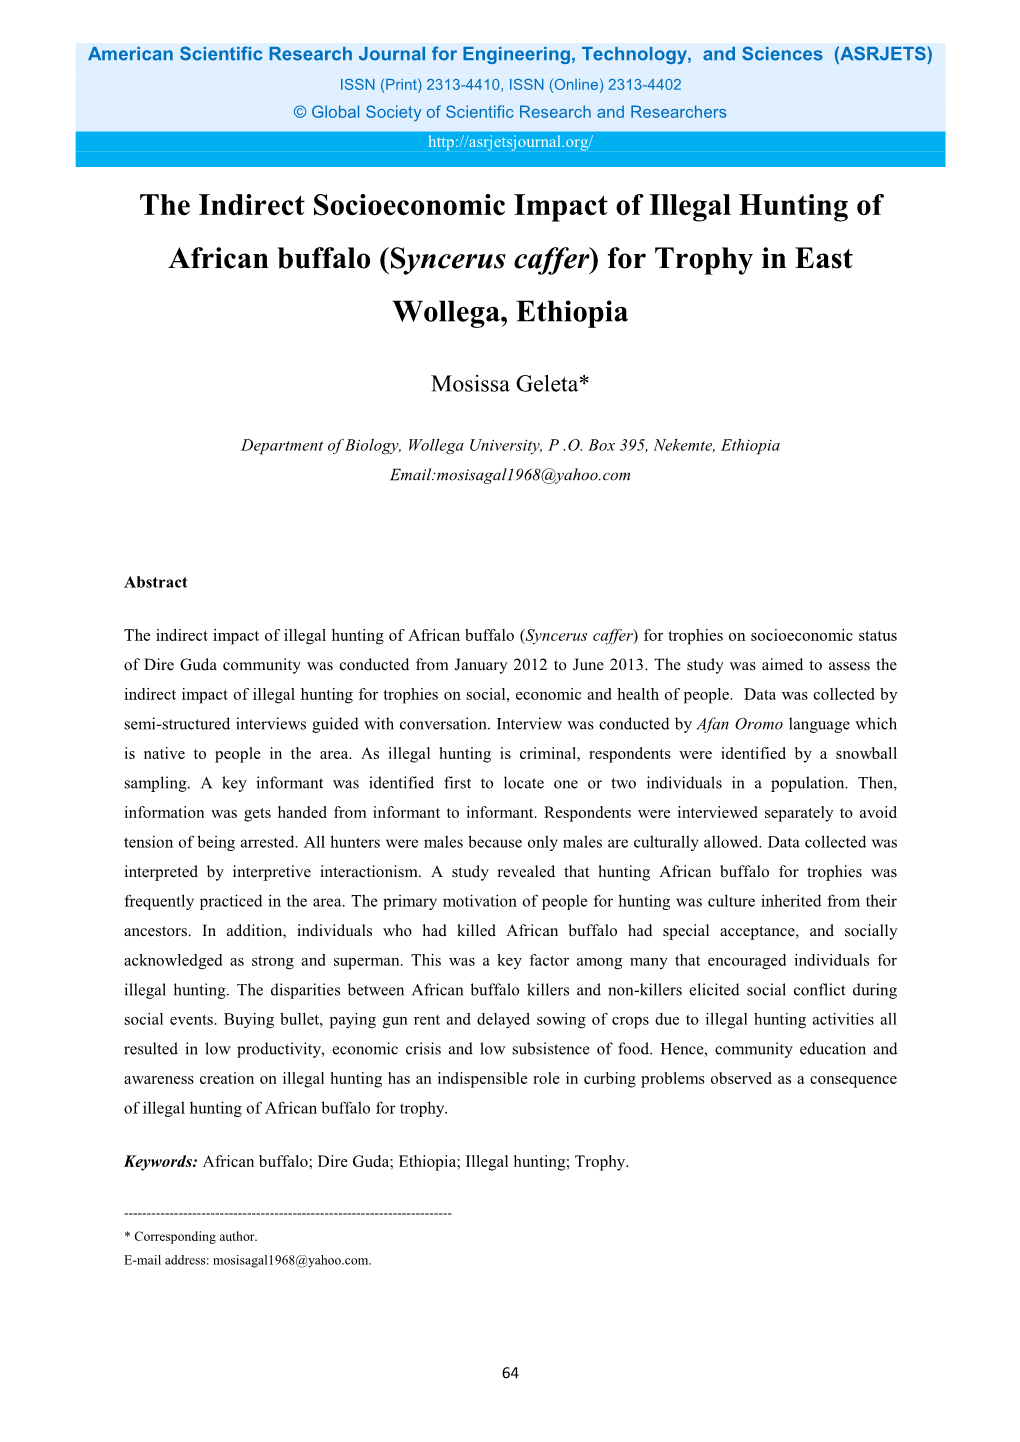 The Indirect Socioeconomic Impact of Illegal Hunting of African Buffalo (Syncerus Caffer) for Trophy in East Wollega, Ethiopia